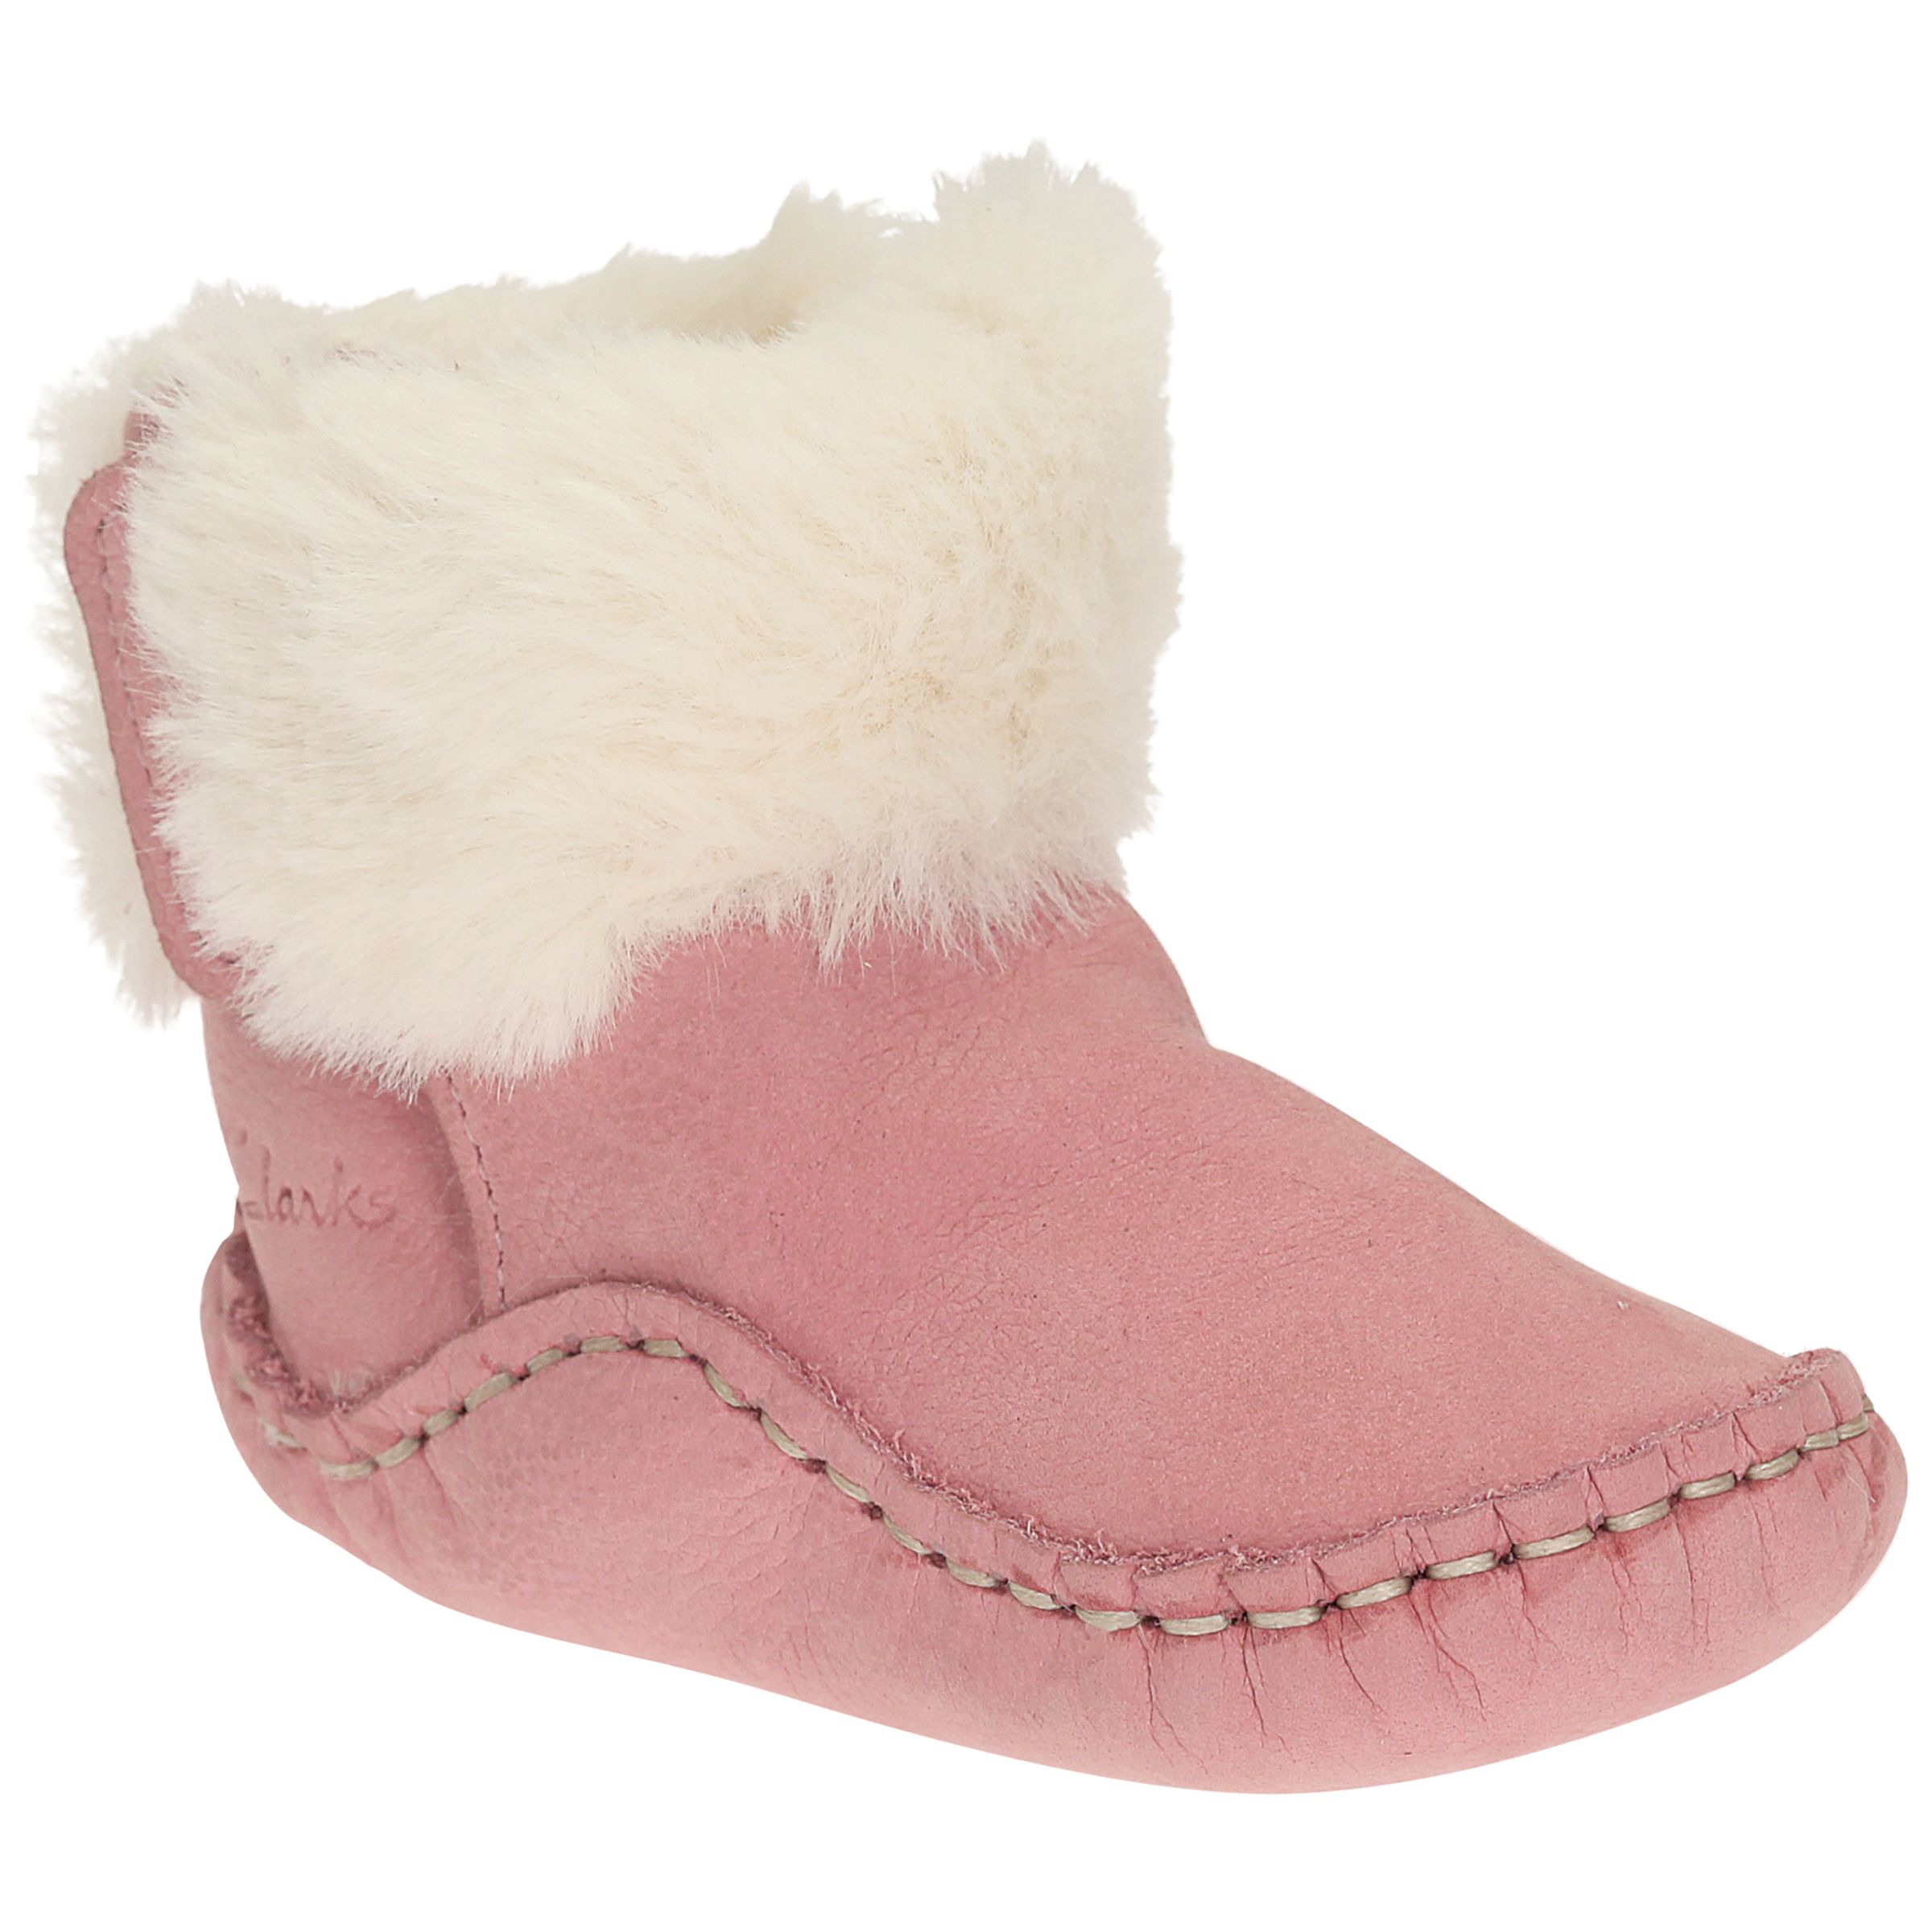 clarks pink baby shoes